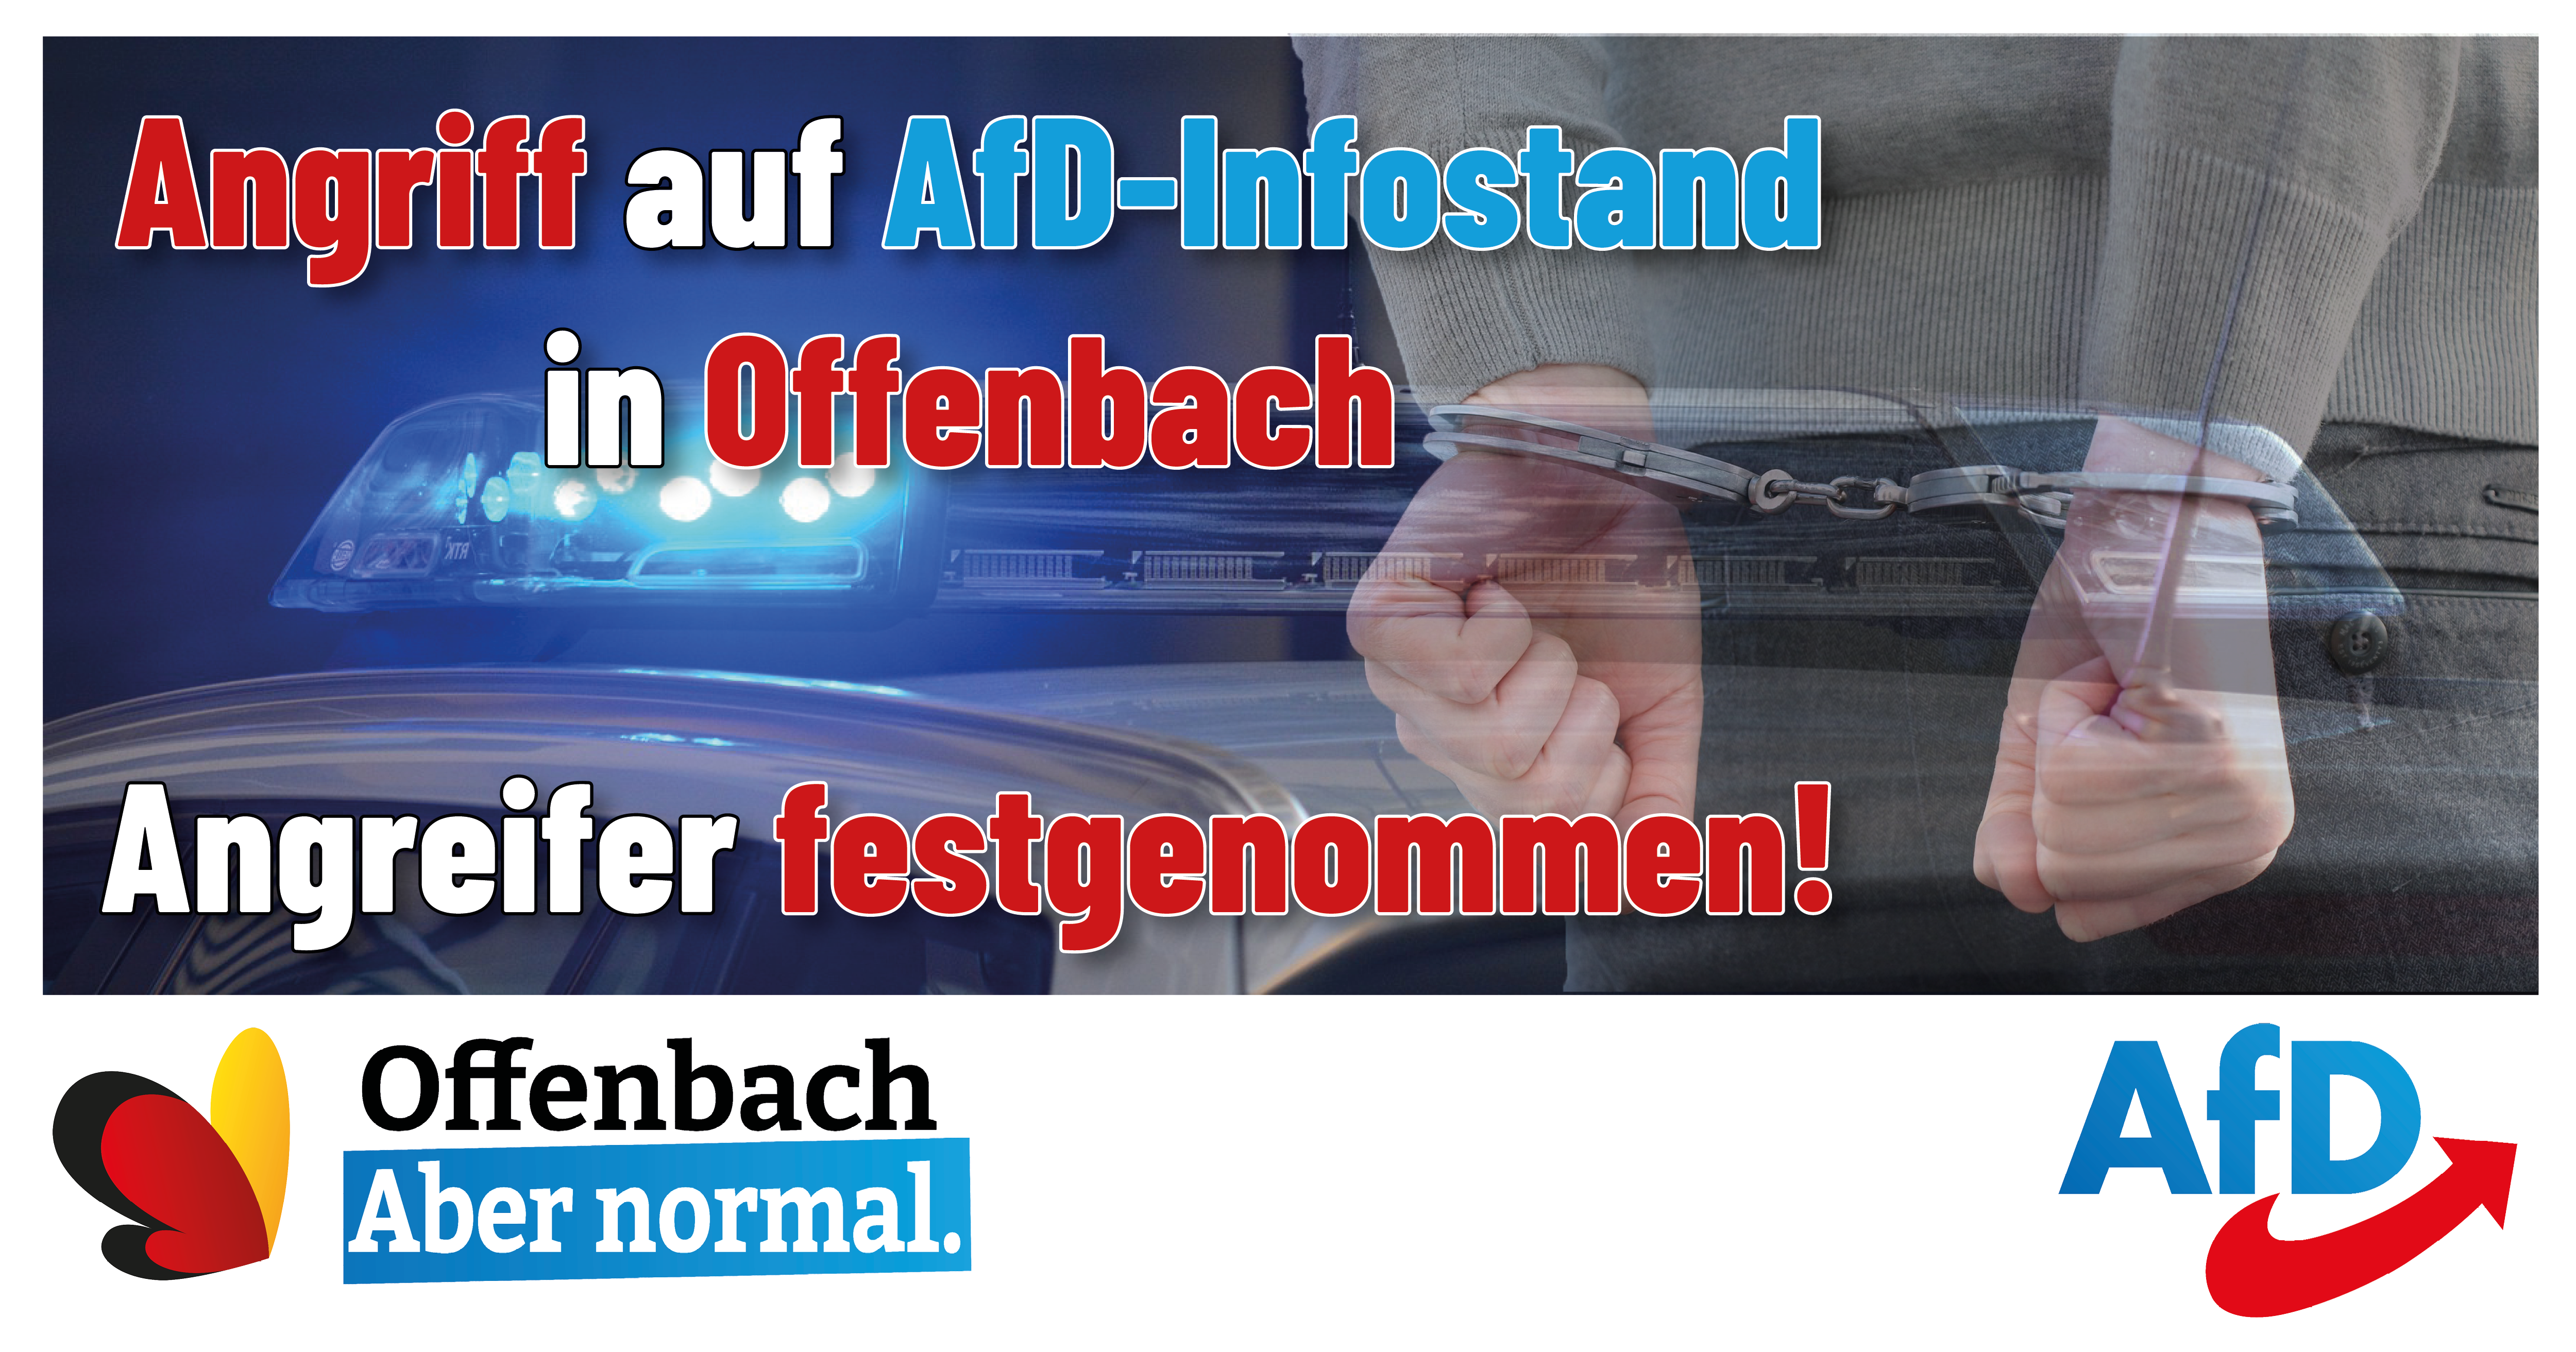 Read more about the article Angriff auf AfD-Infostand in der Offenbacher Innenstadt